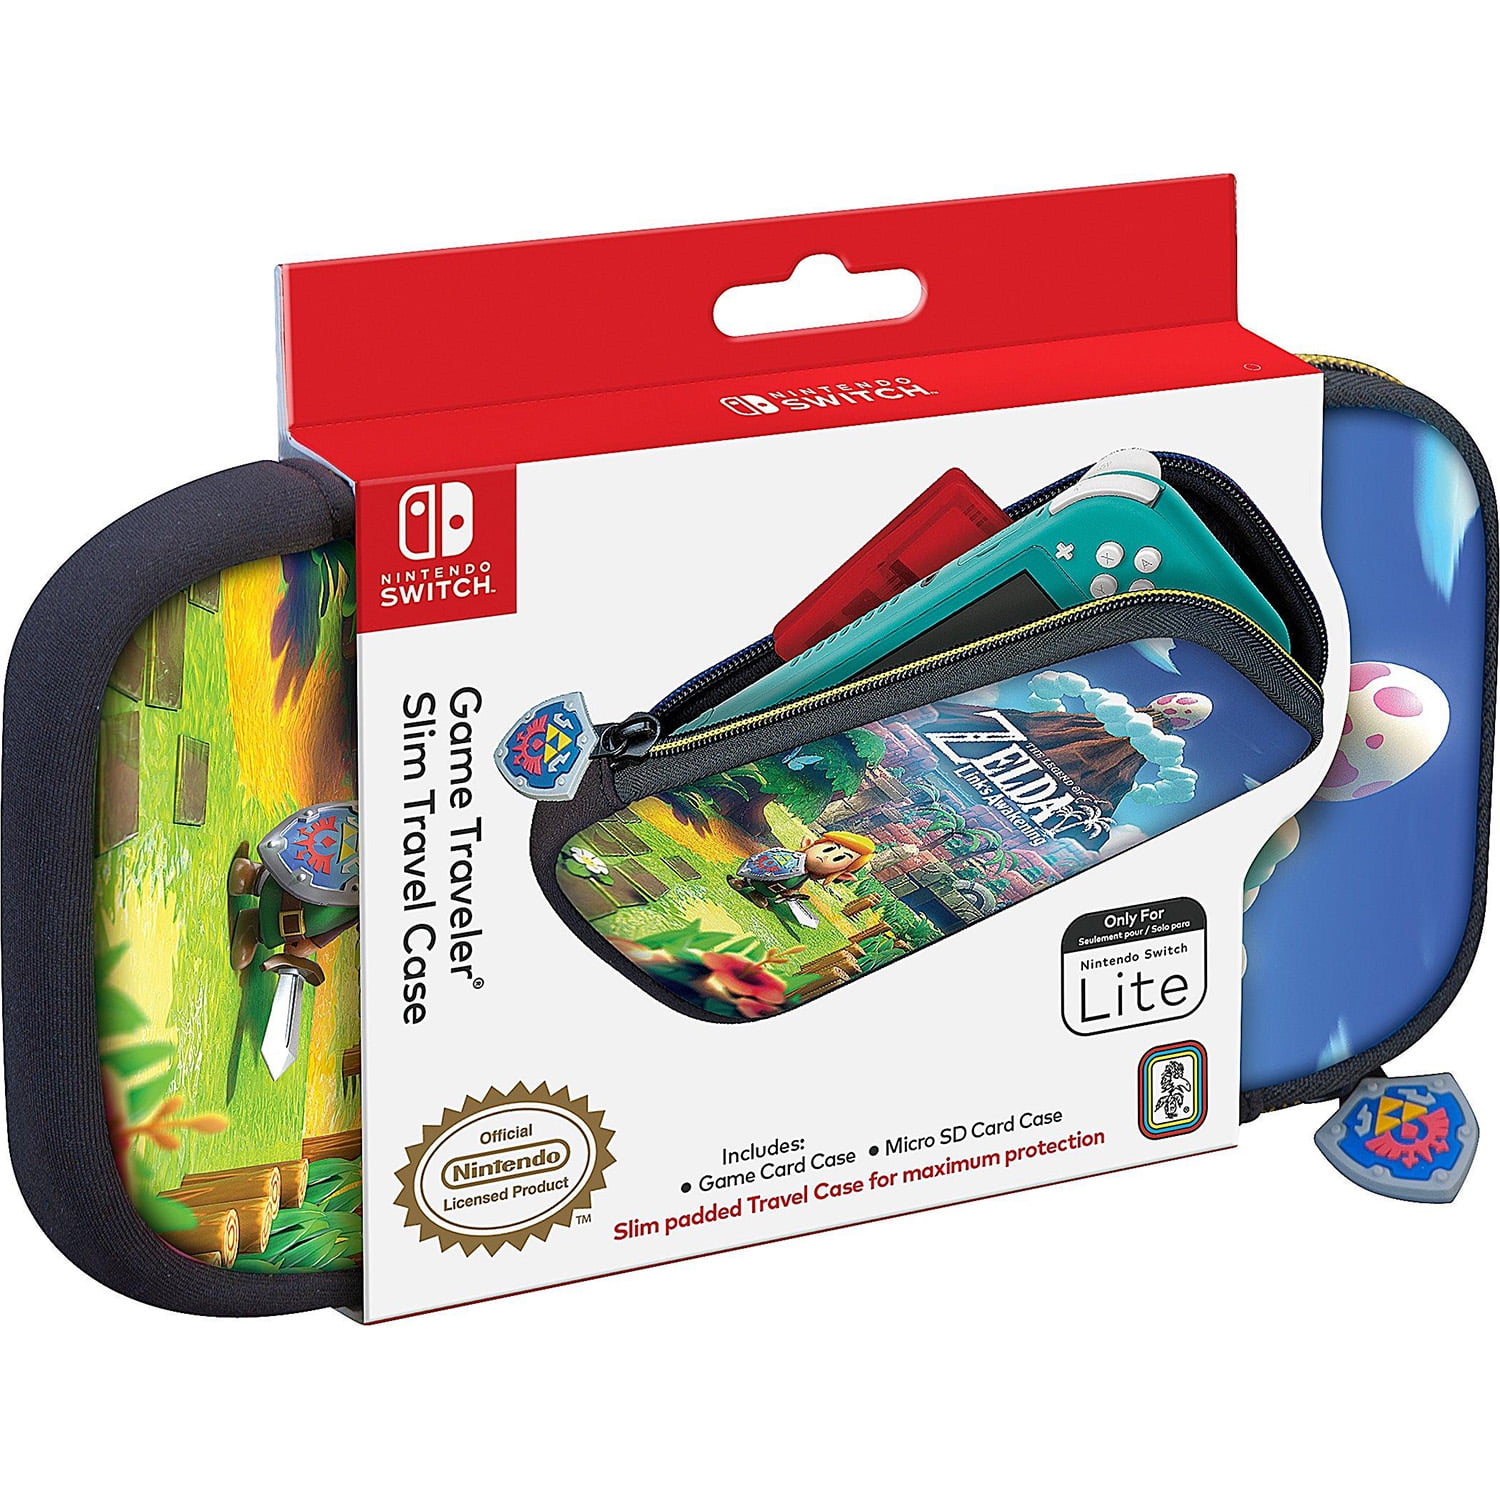 RDS Industries - The Legend of Link: Nintendo Switch Video Game Traveler, Slim Travel Video Gaming Carrying Case Walmart.com